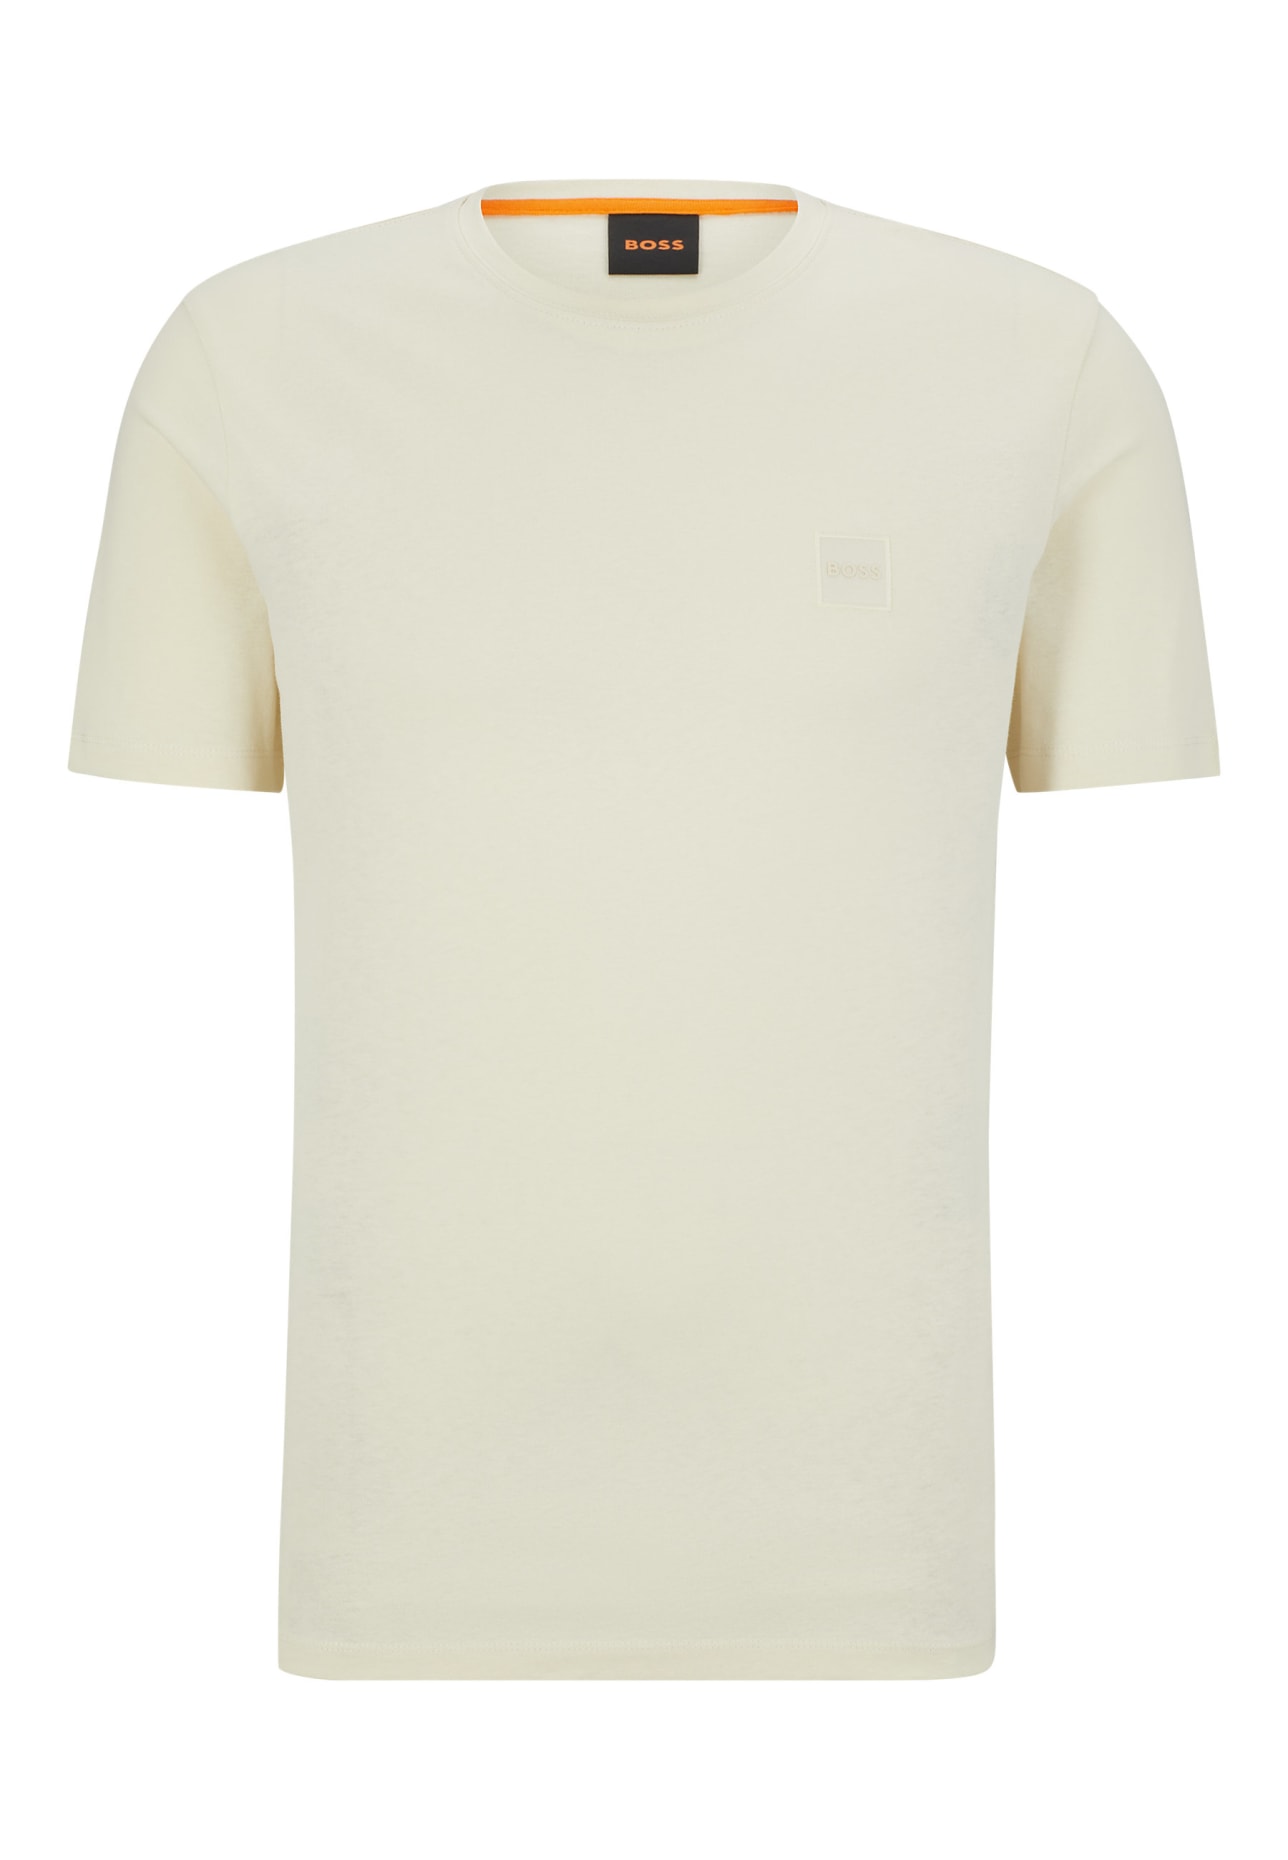 BOSS T-Shirt TALES Relaxed Fit in beige